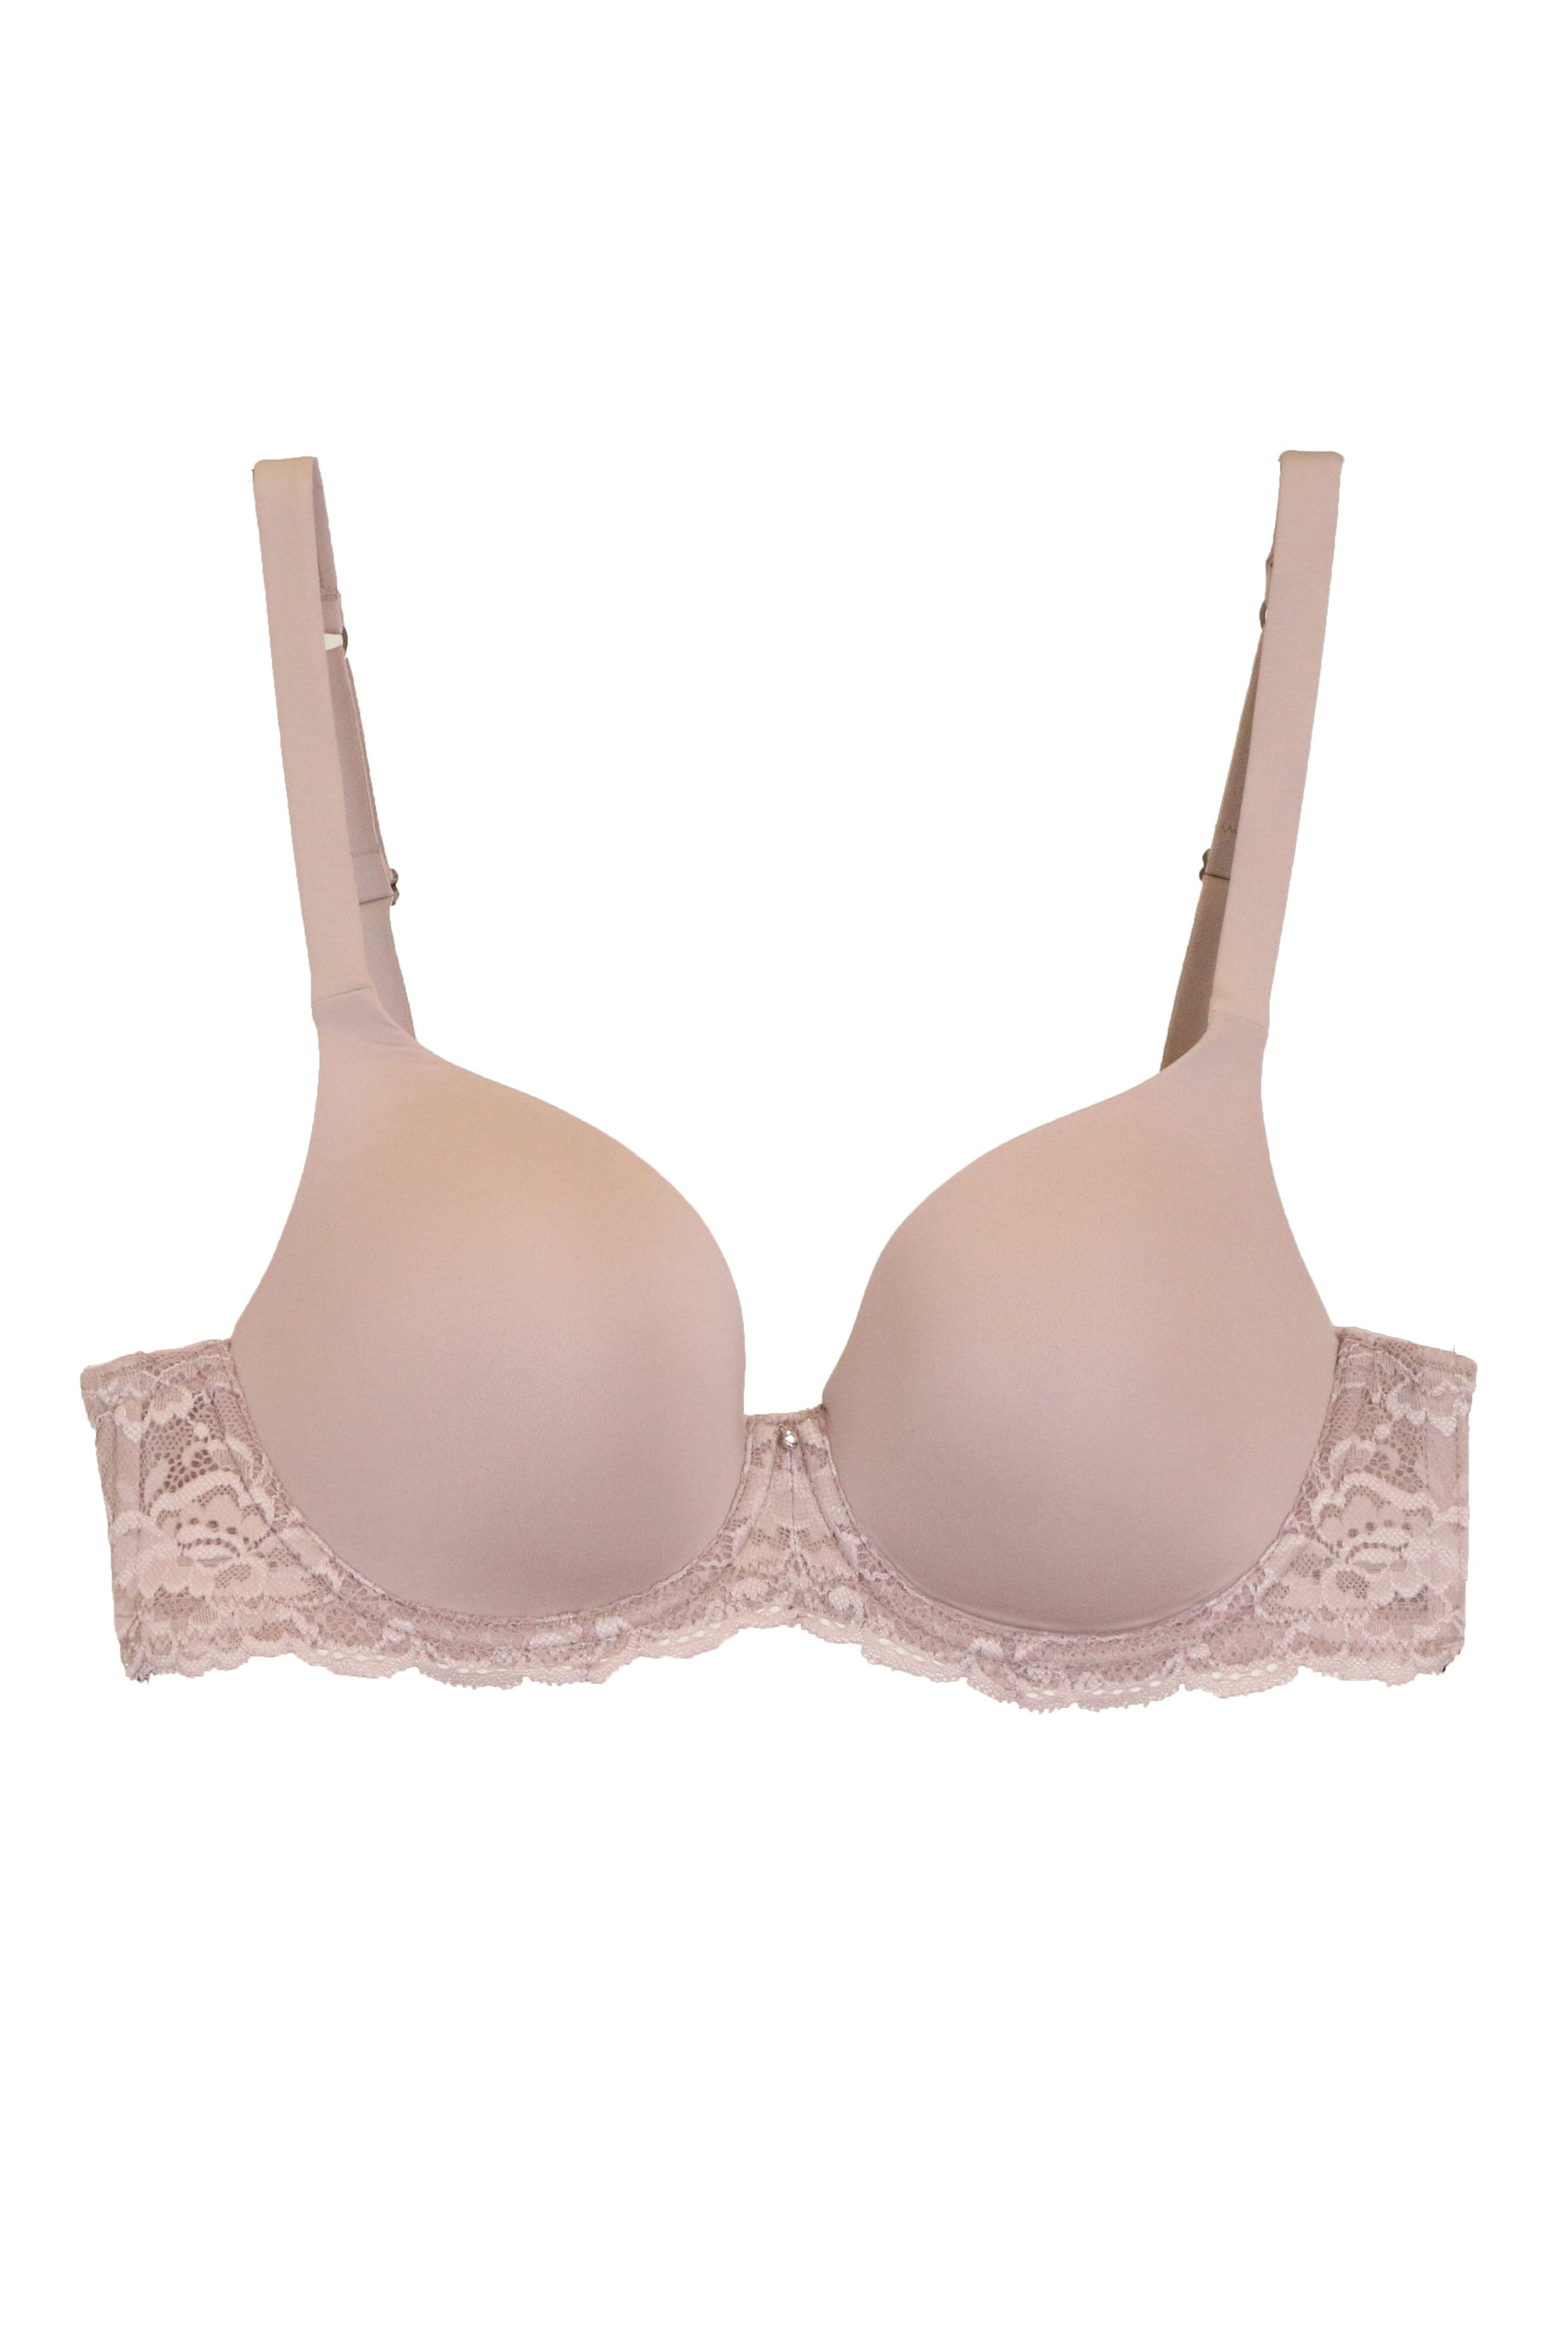 Pure Plus Full Coverage T-Shirt Bra- Almond Spice - Chérie Amour